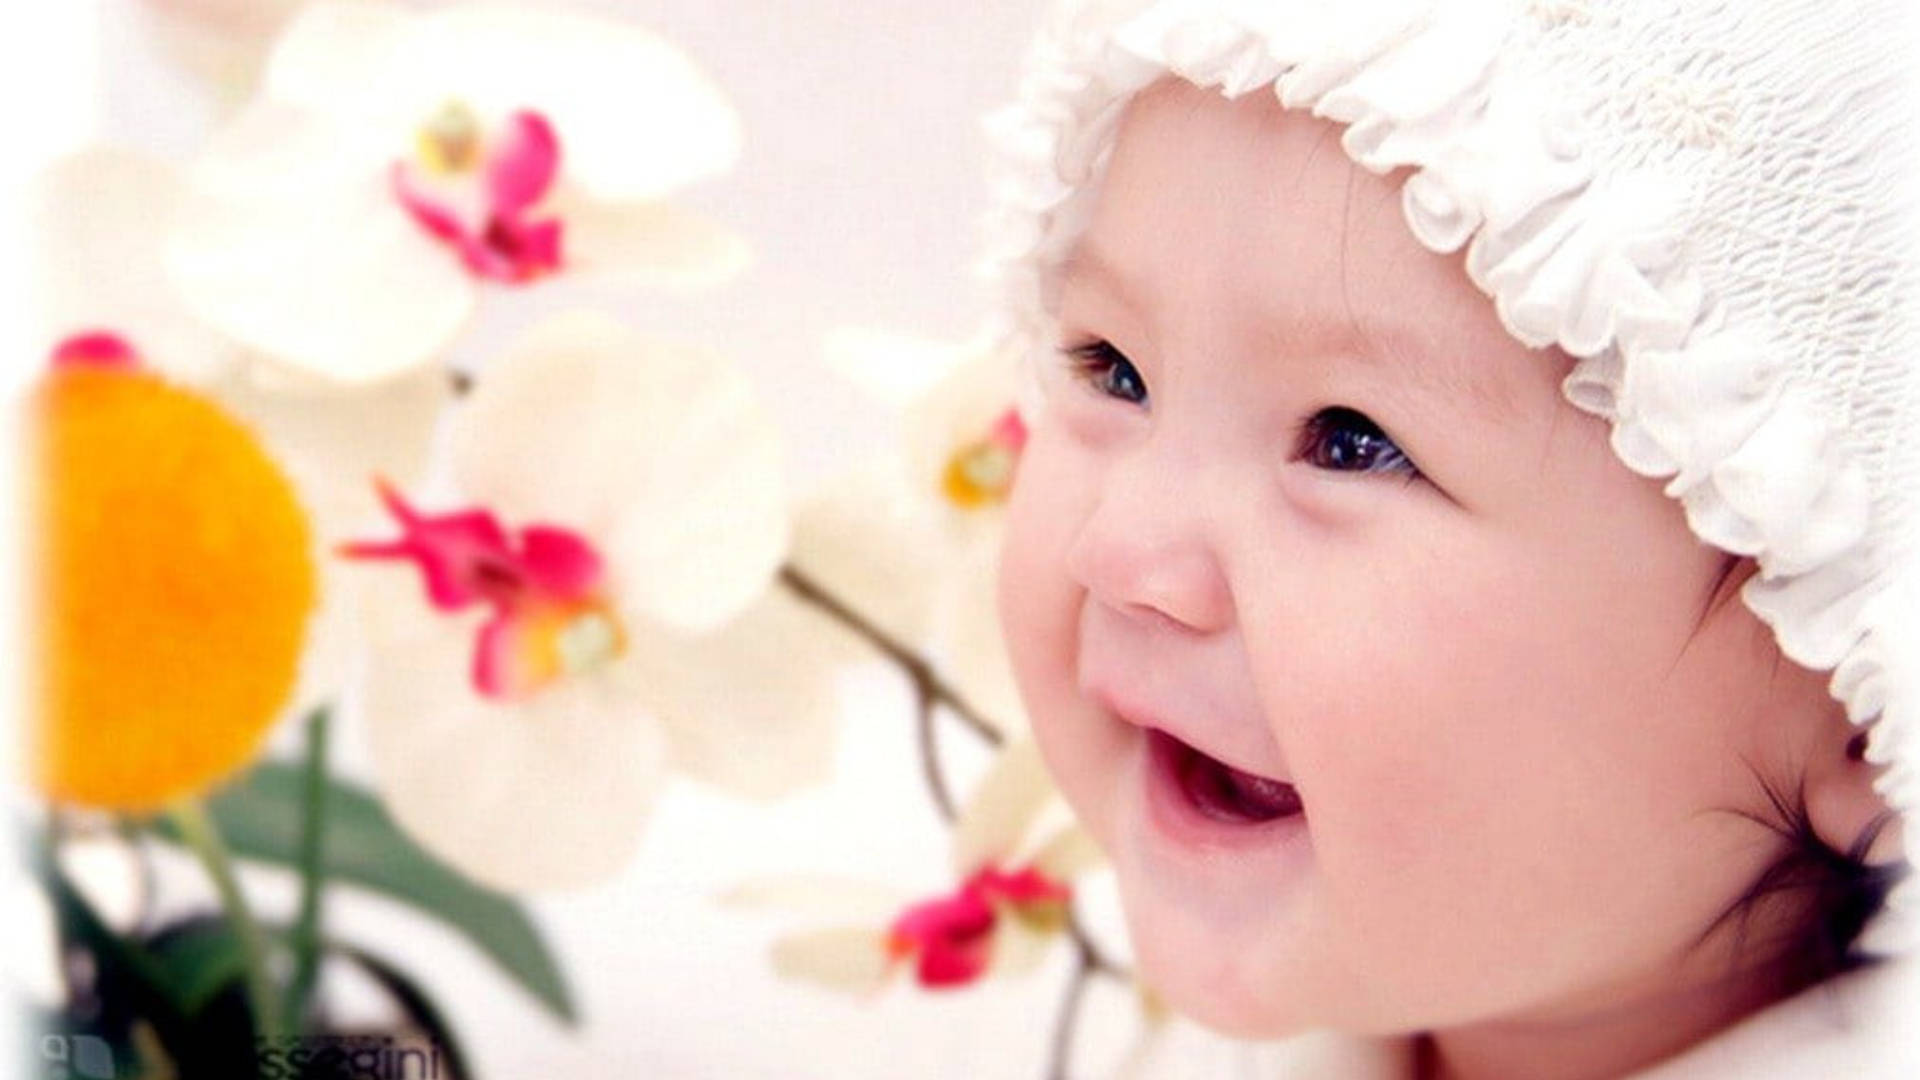 Cheerful Baby Love With Flowers Wallpaper